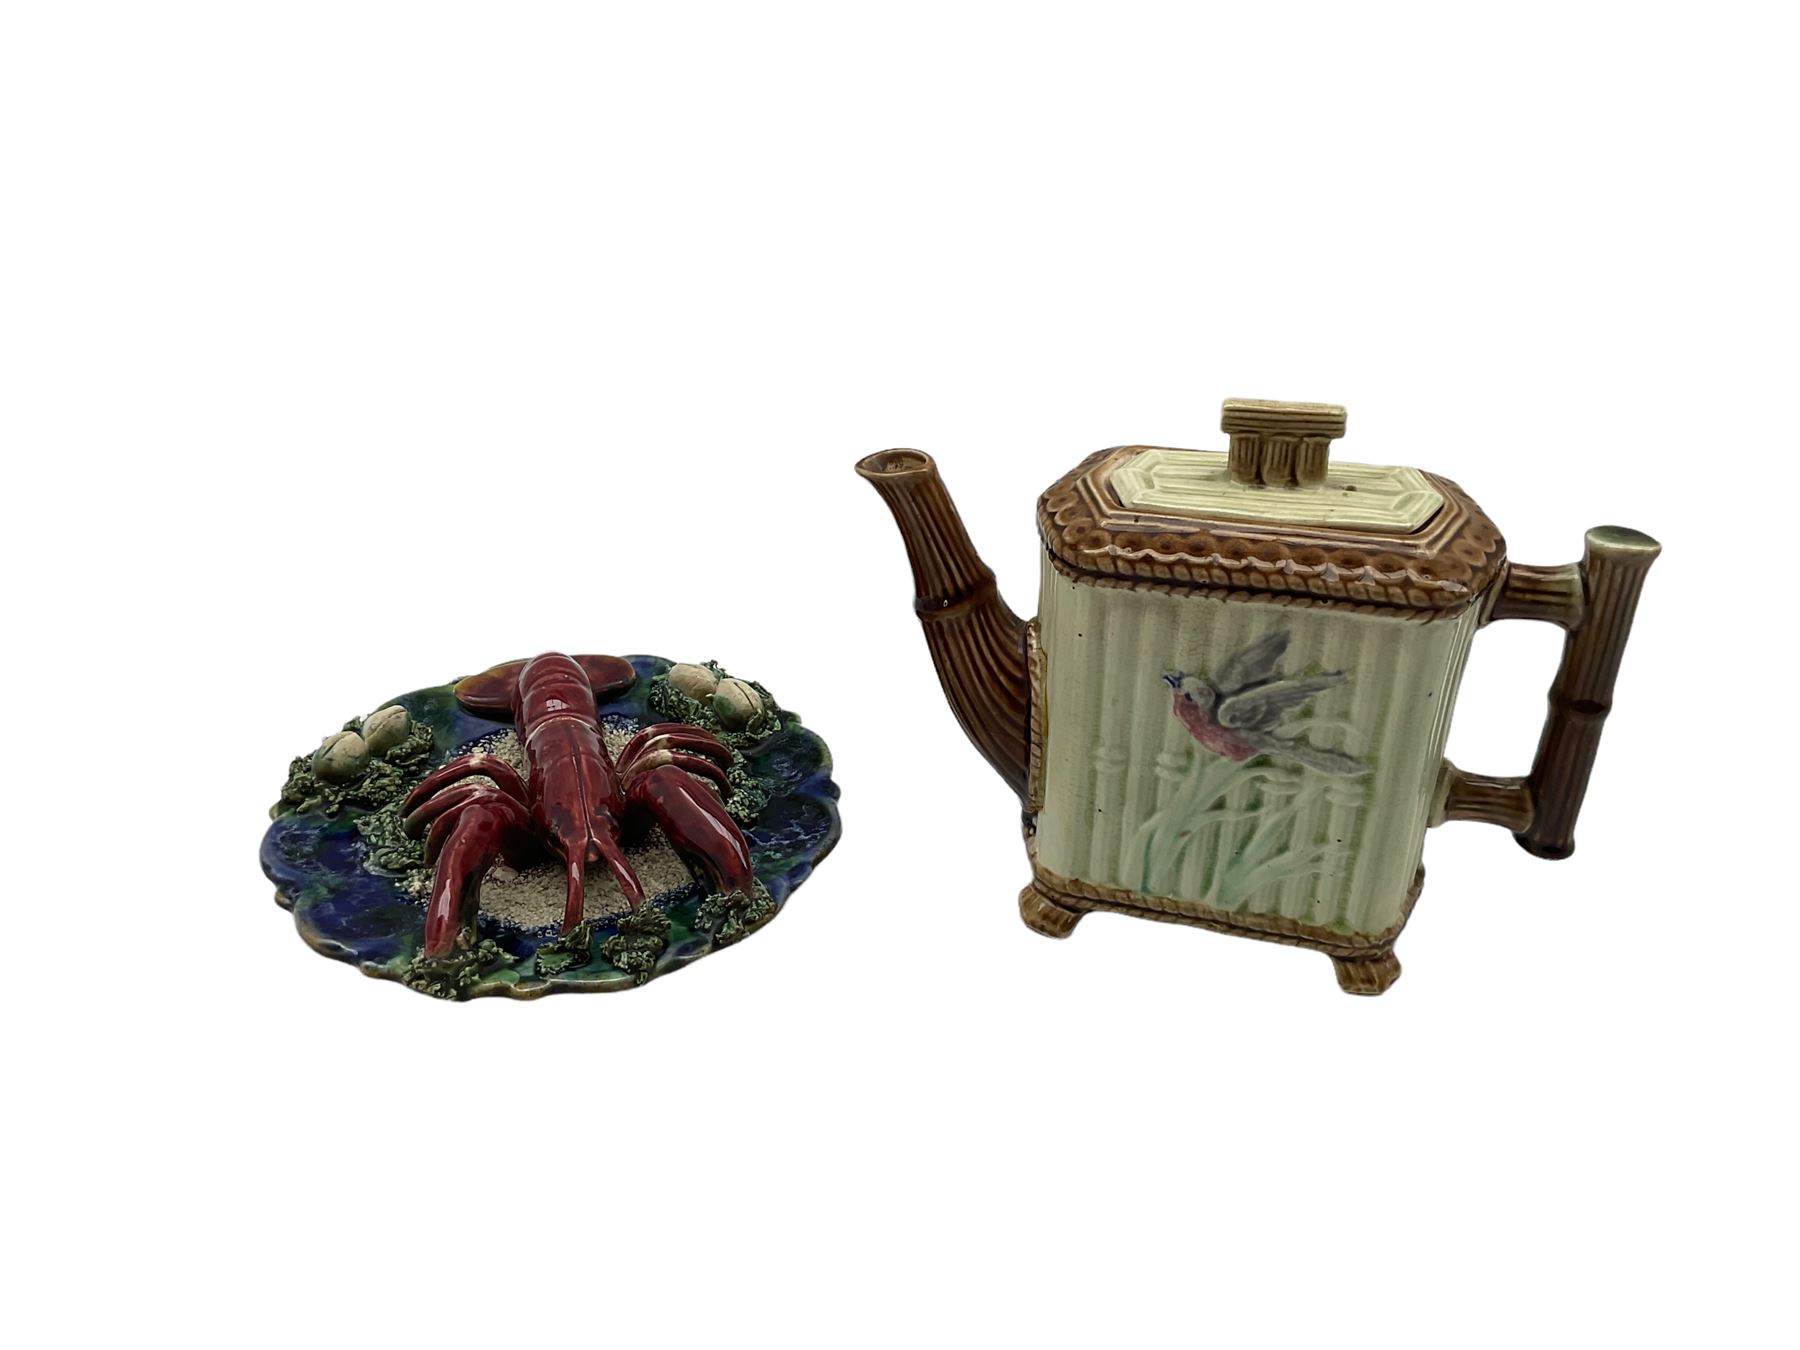 Palissy style majolica lobster wall plaque together with majolica teapot of bamboo form with bird de